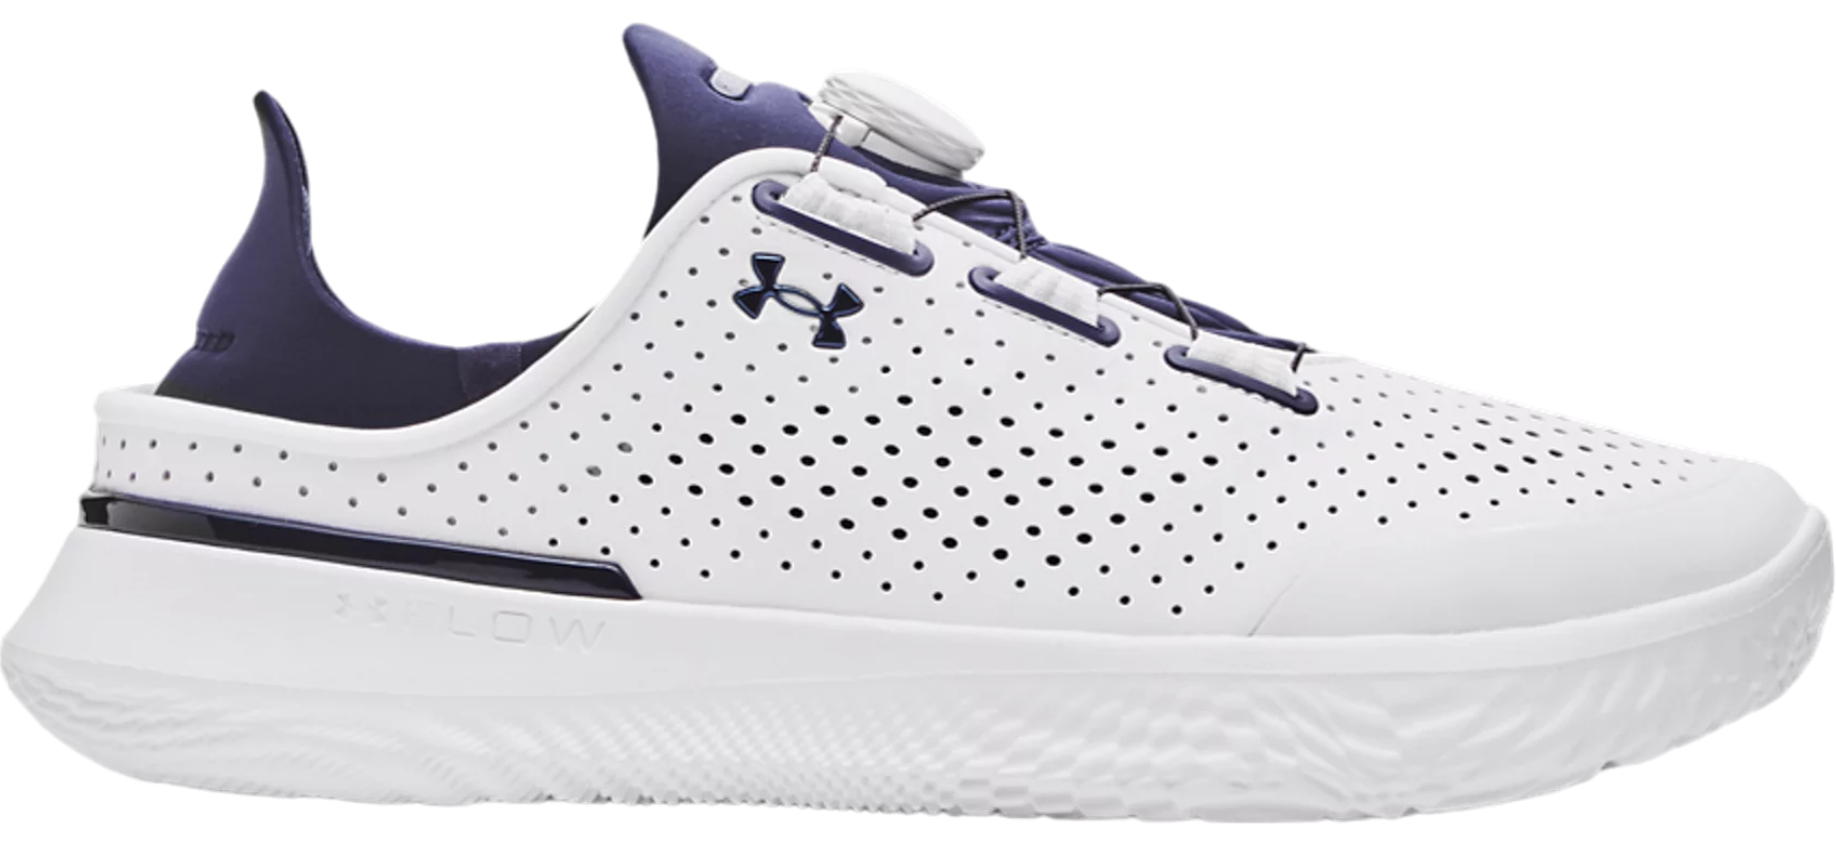 Scarpe fitness Under Armour Flow Slipspeed Trainr SYN